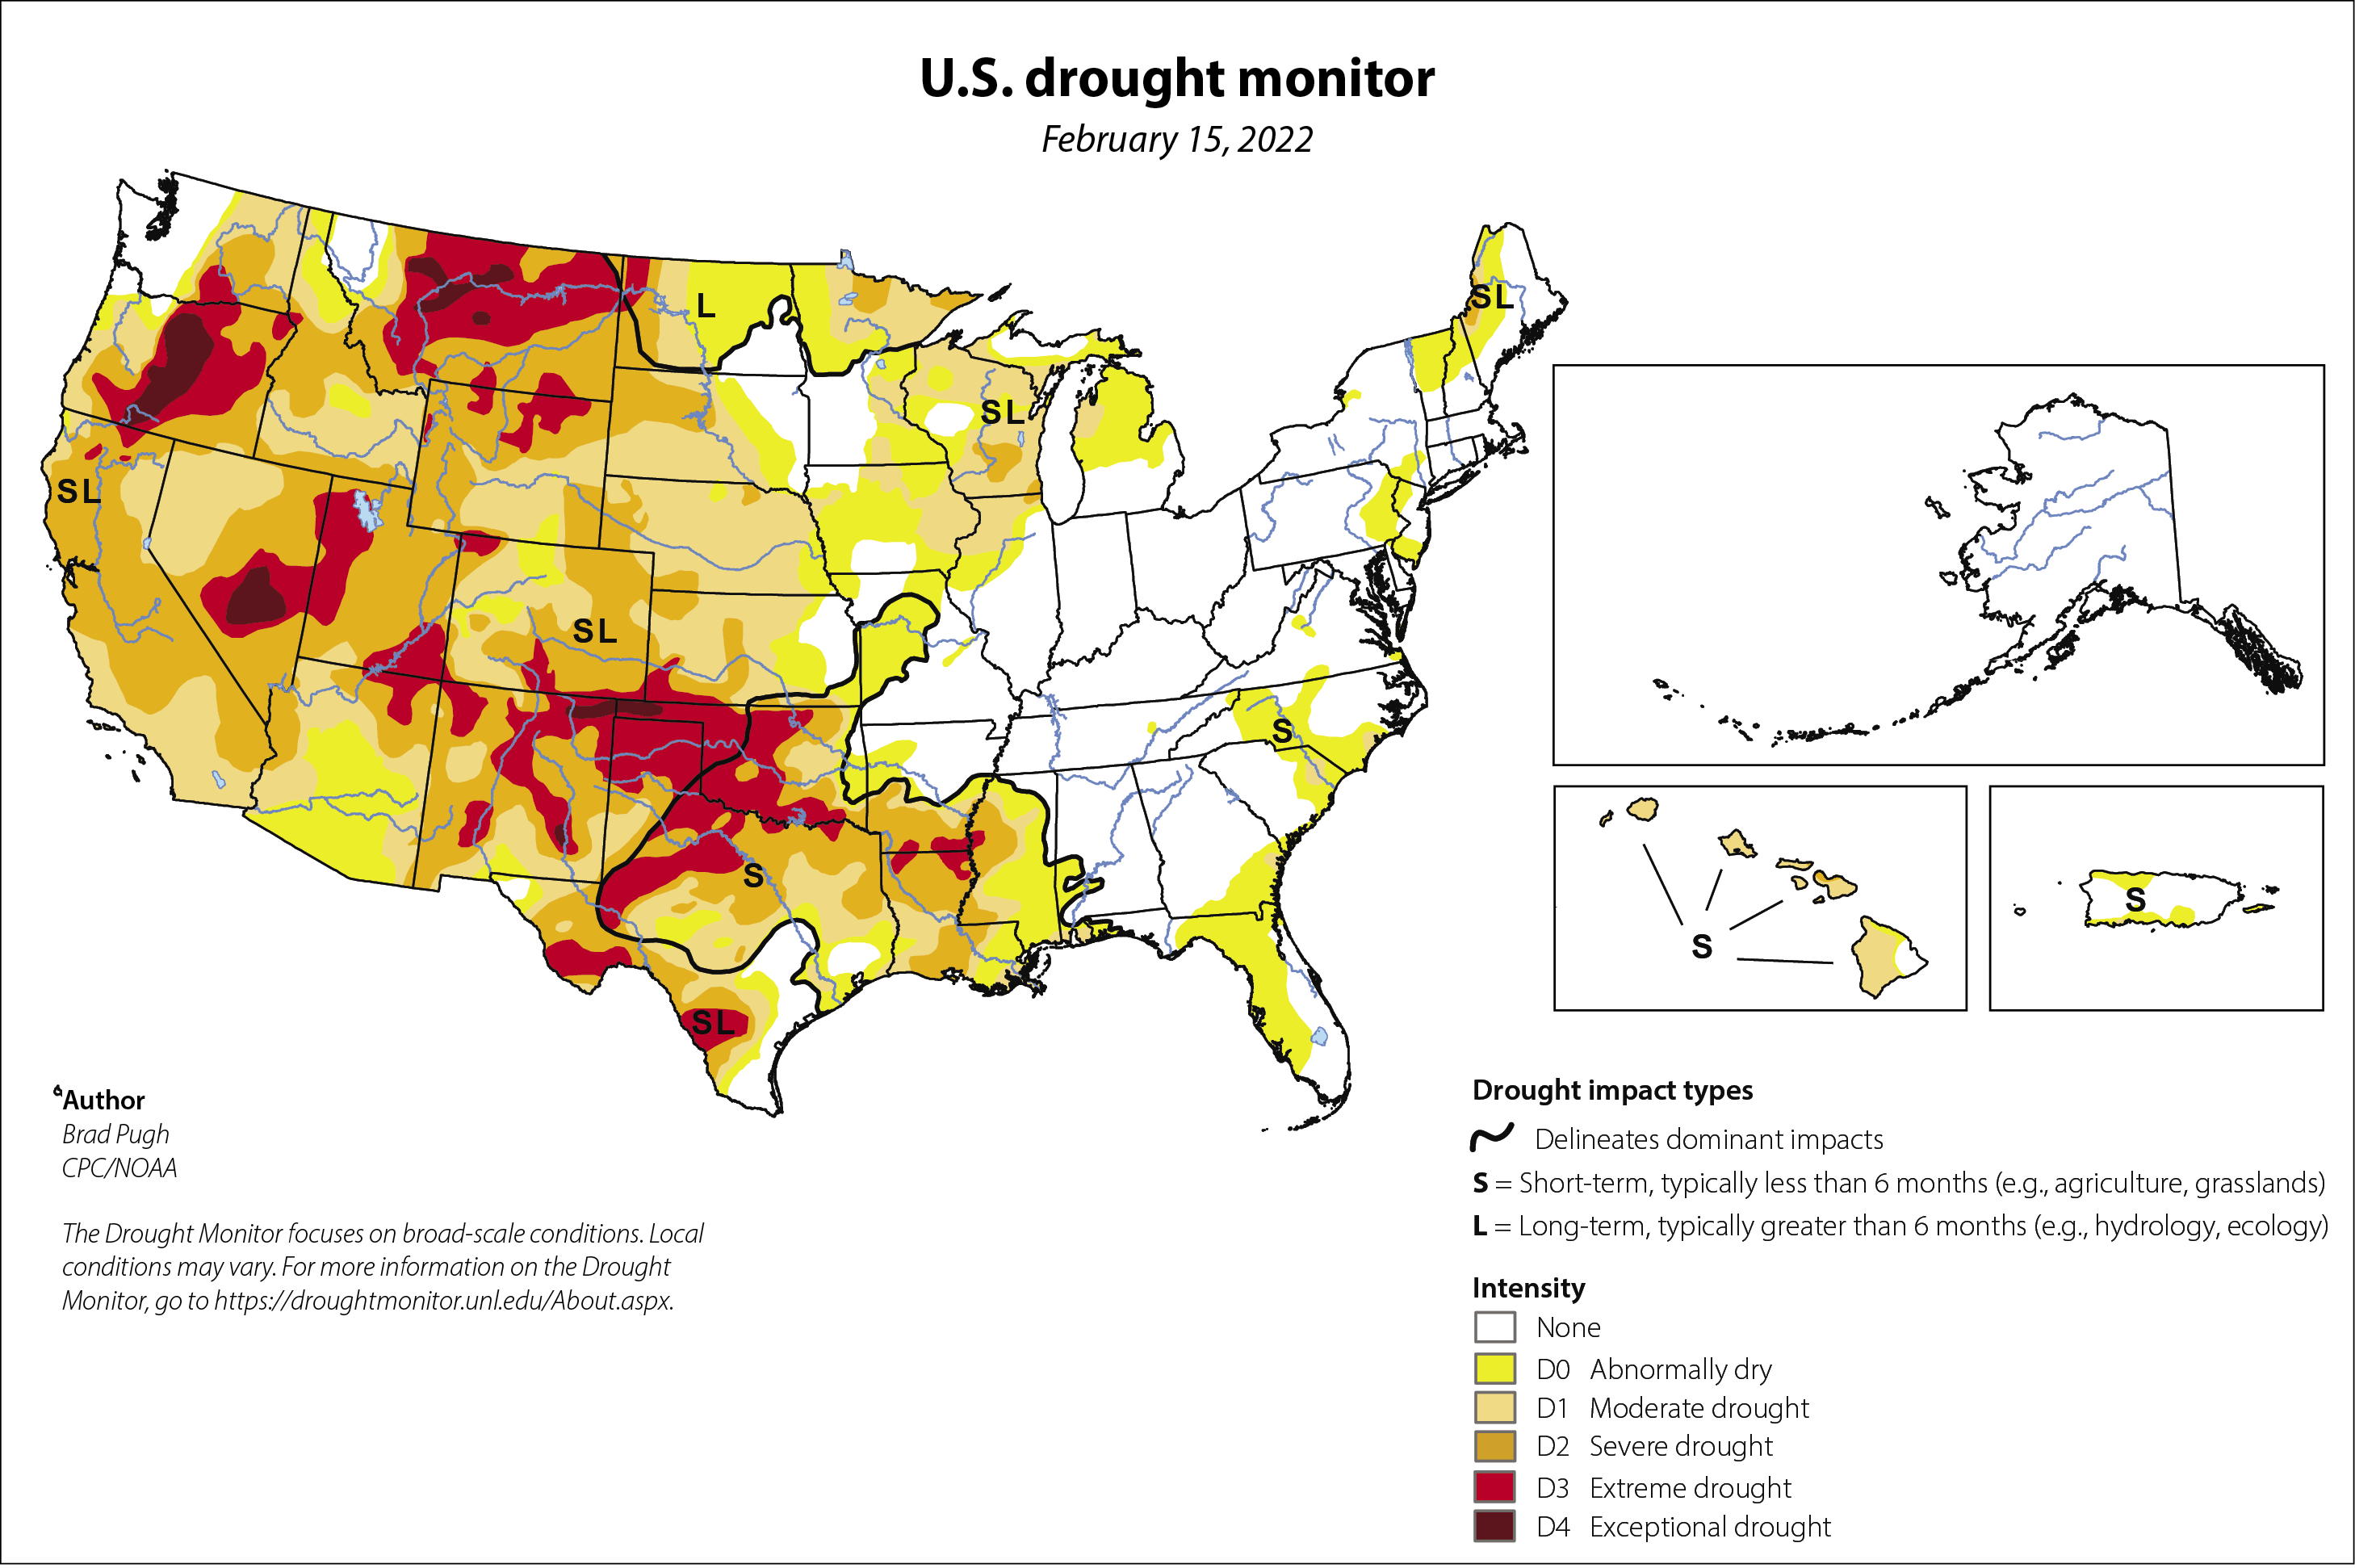 La Niña has returned, leading to concerns that drought will persist or further intensify across the nation’s southwestern quadrant.